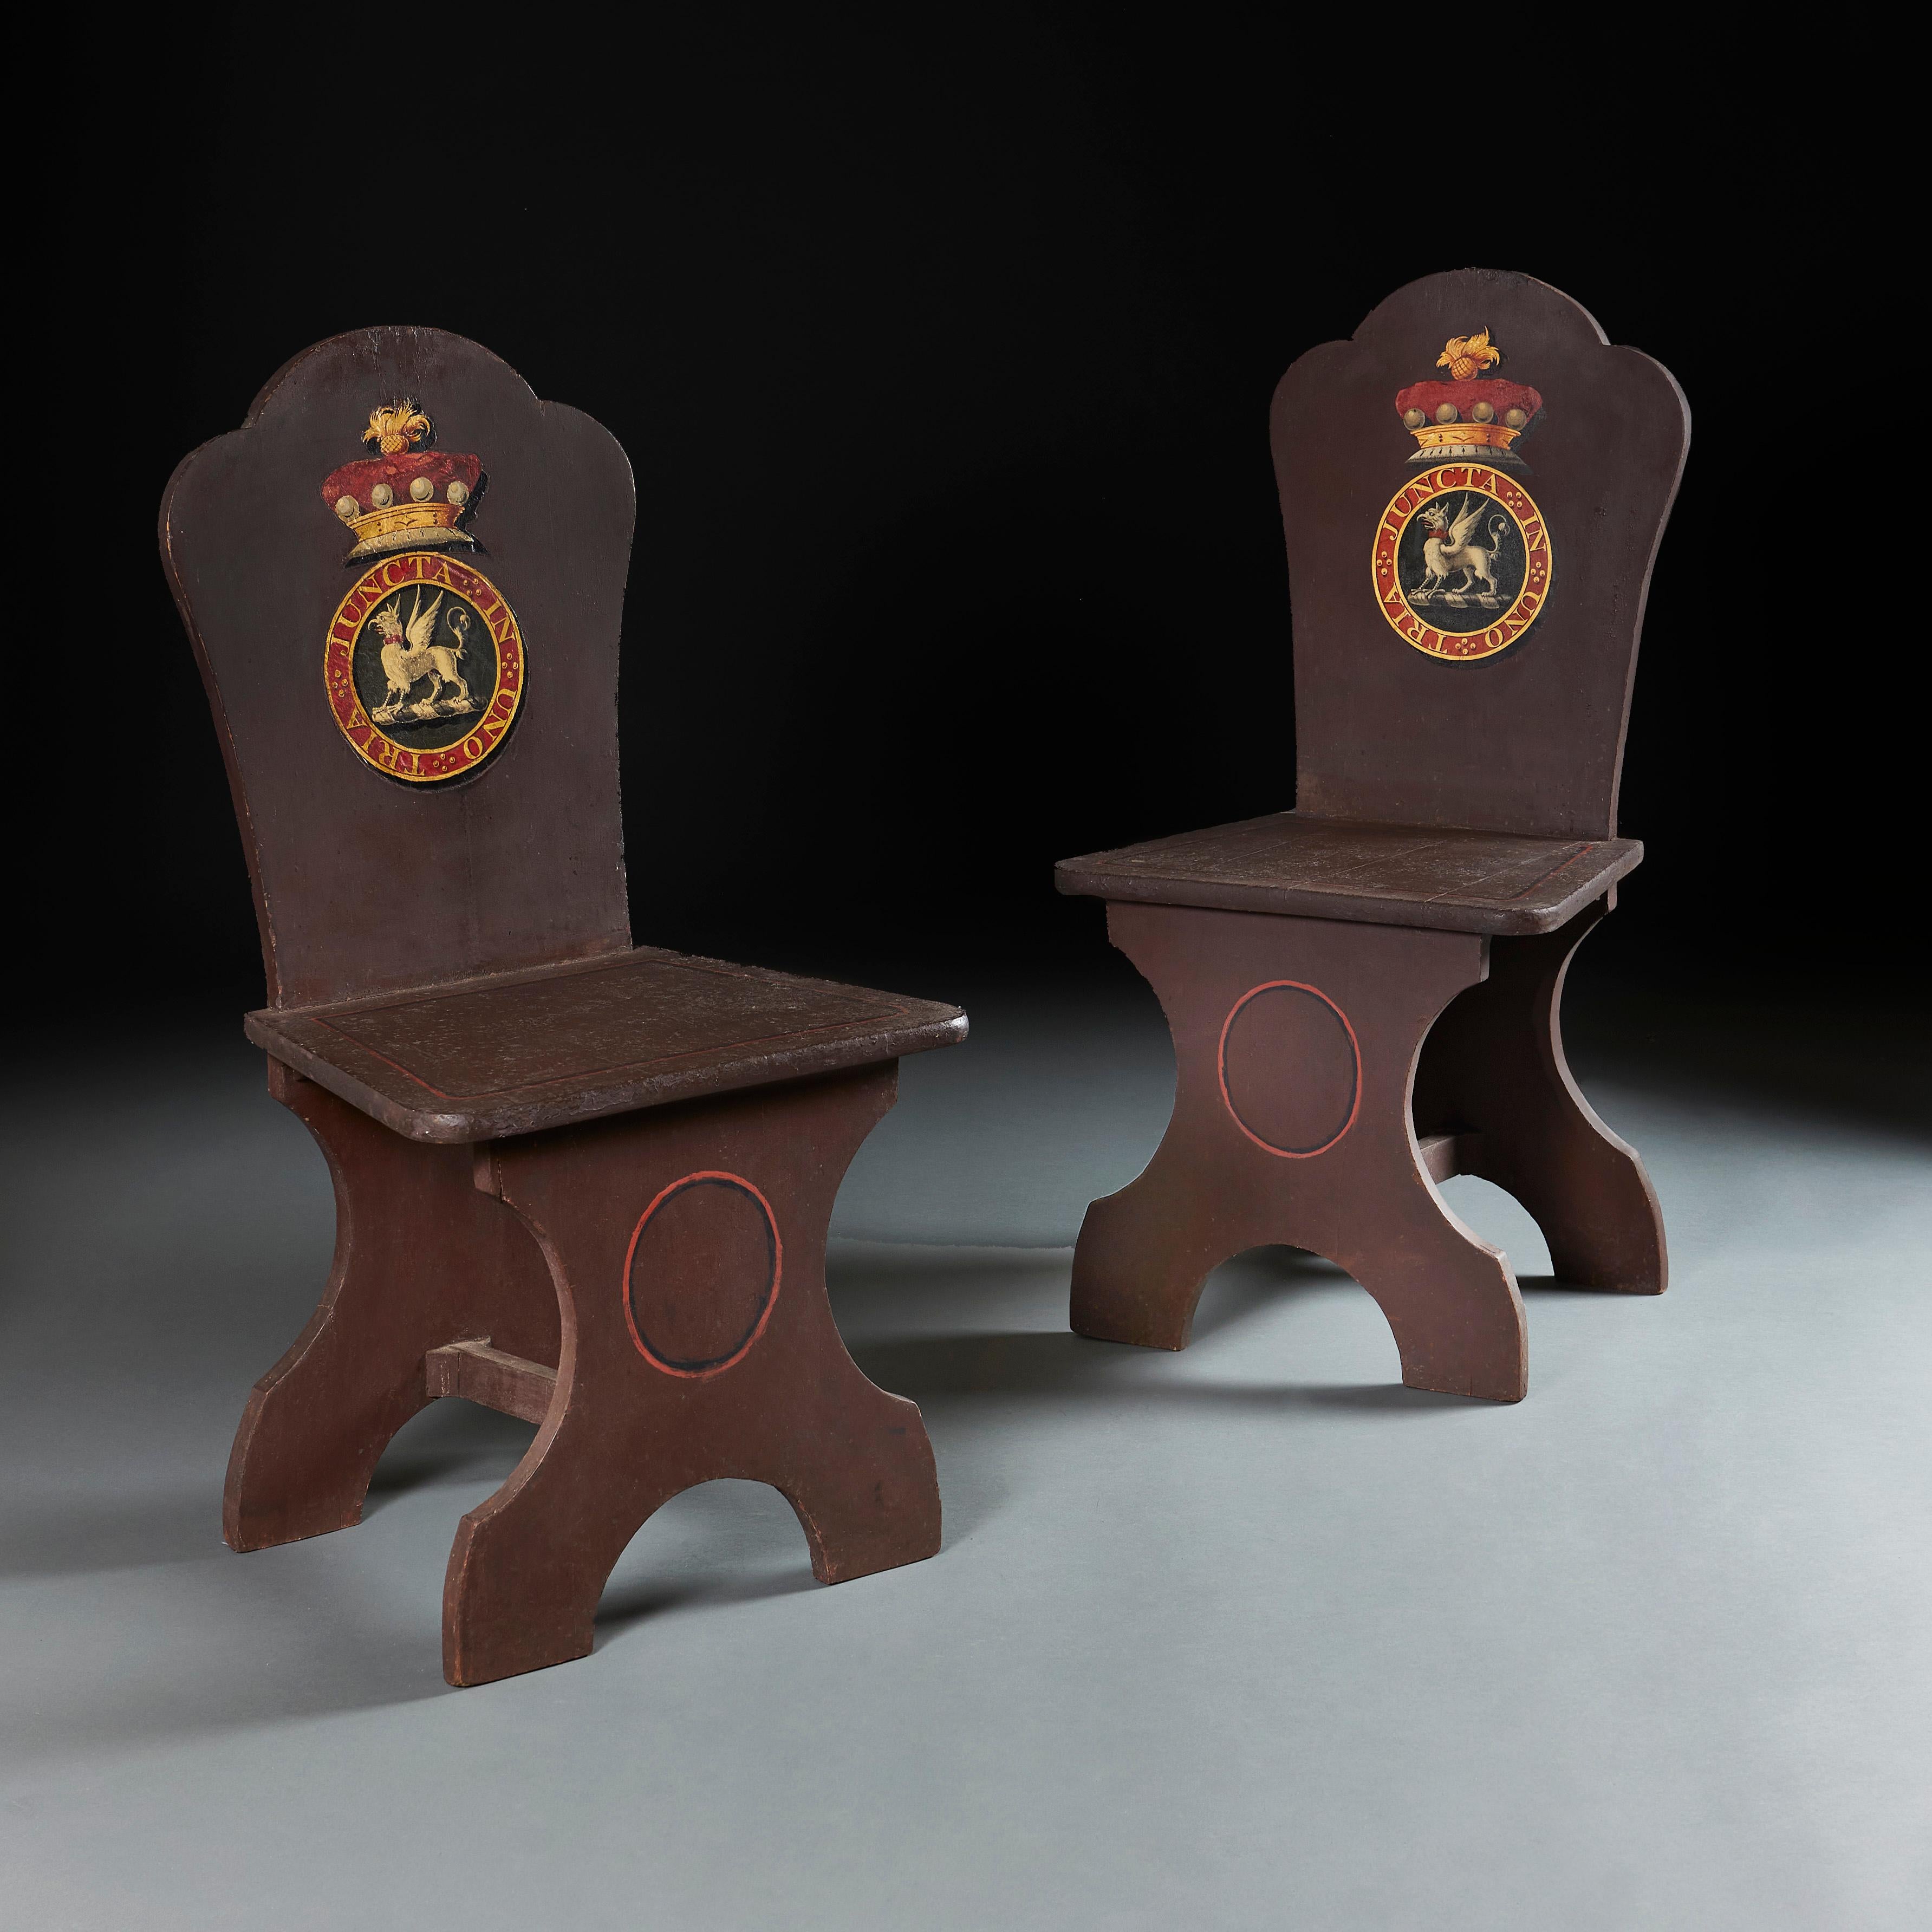 England, circa 1840
Pair of mid 19th century painted hall chairs, with applied armorials, decorated with an Earl’s coronet and the Order of the Bath
Height 99.00cm
Width 51.00cm
Depth 27.00cm
Seat height 46.00cm.